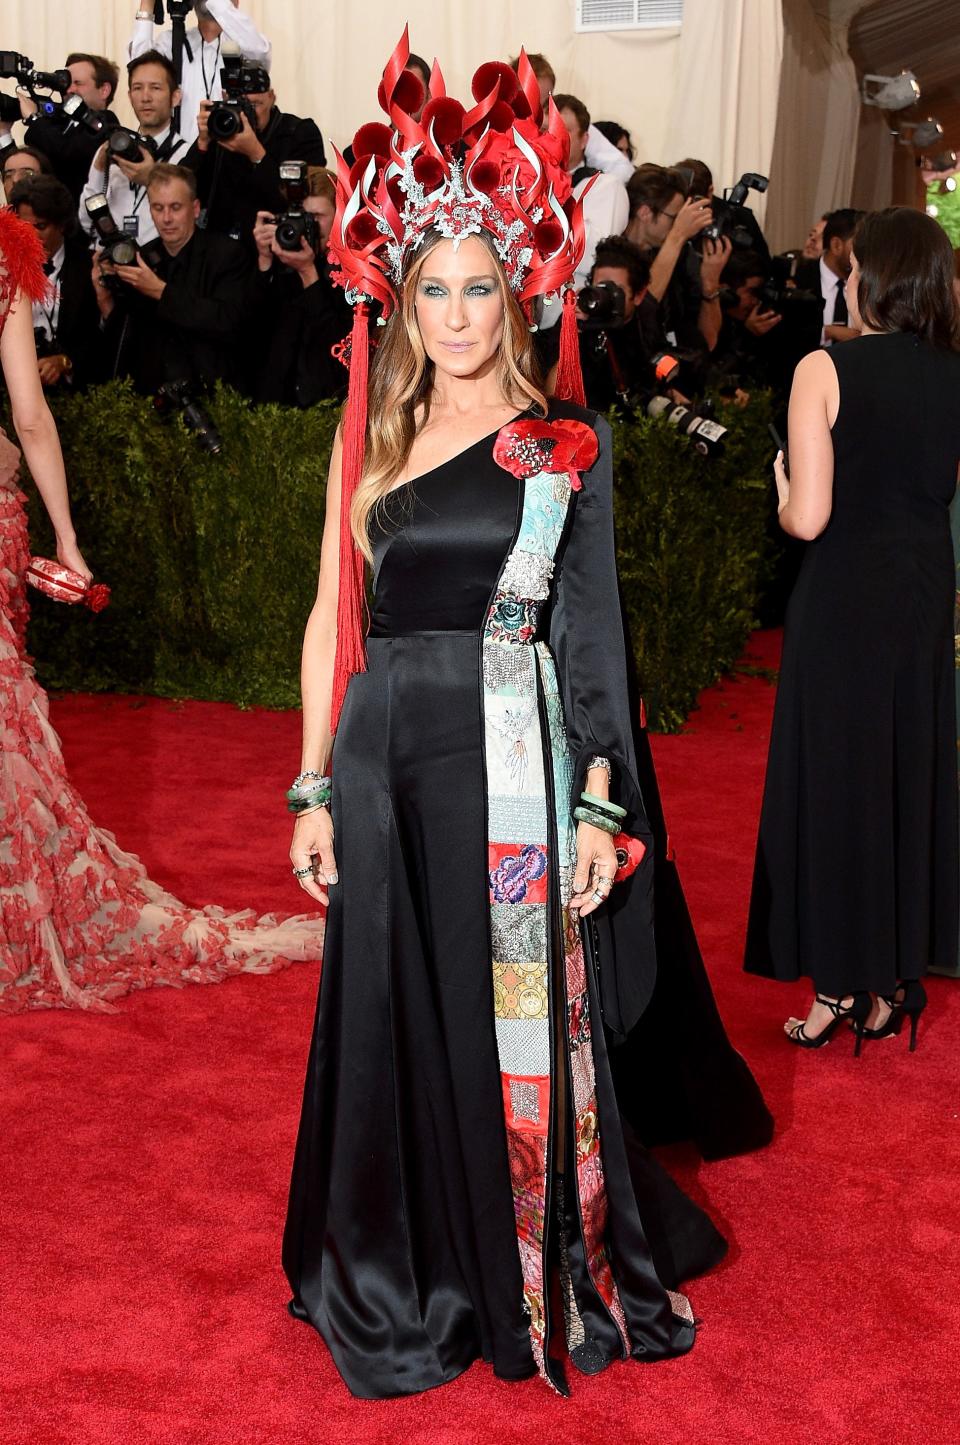 SJP is known for her near-perfect plays on the themes of the Met Gala every year, but in 2015, many felt she took it too far. Many thought the Philip Treacy headpiece she chose for the Chinese-culture-filled night bordered on cultural appropriation. (Her dress was from H&M.)